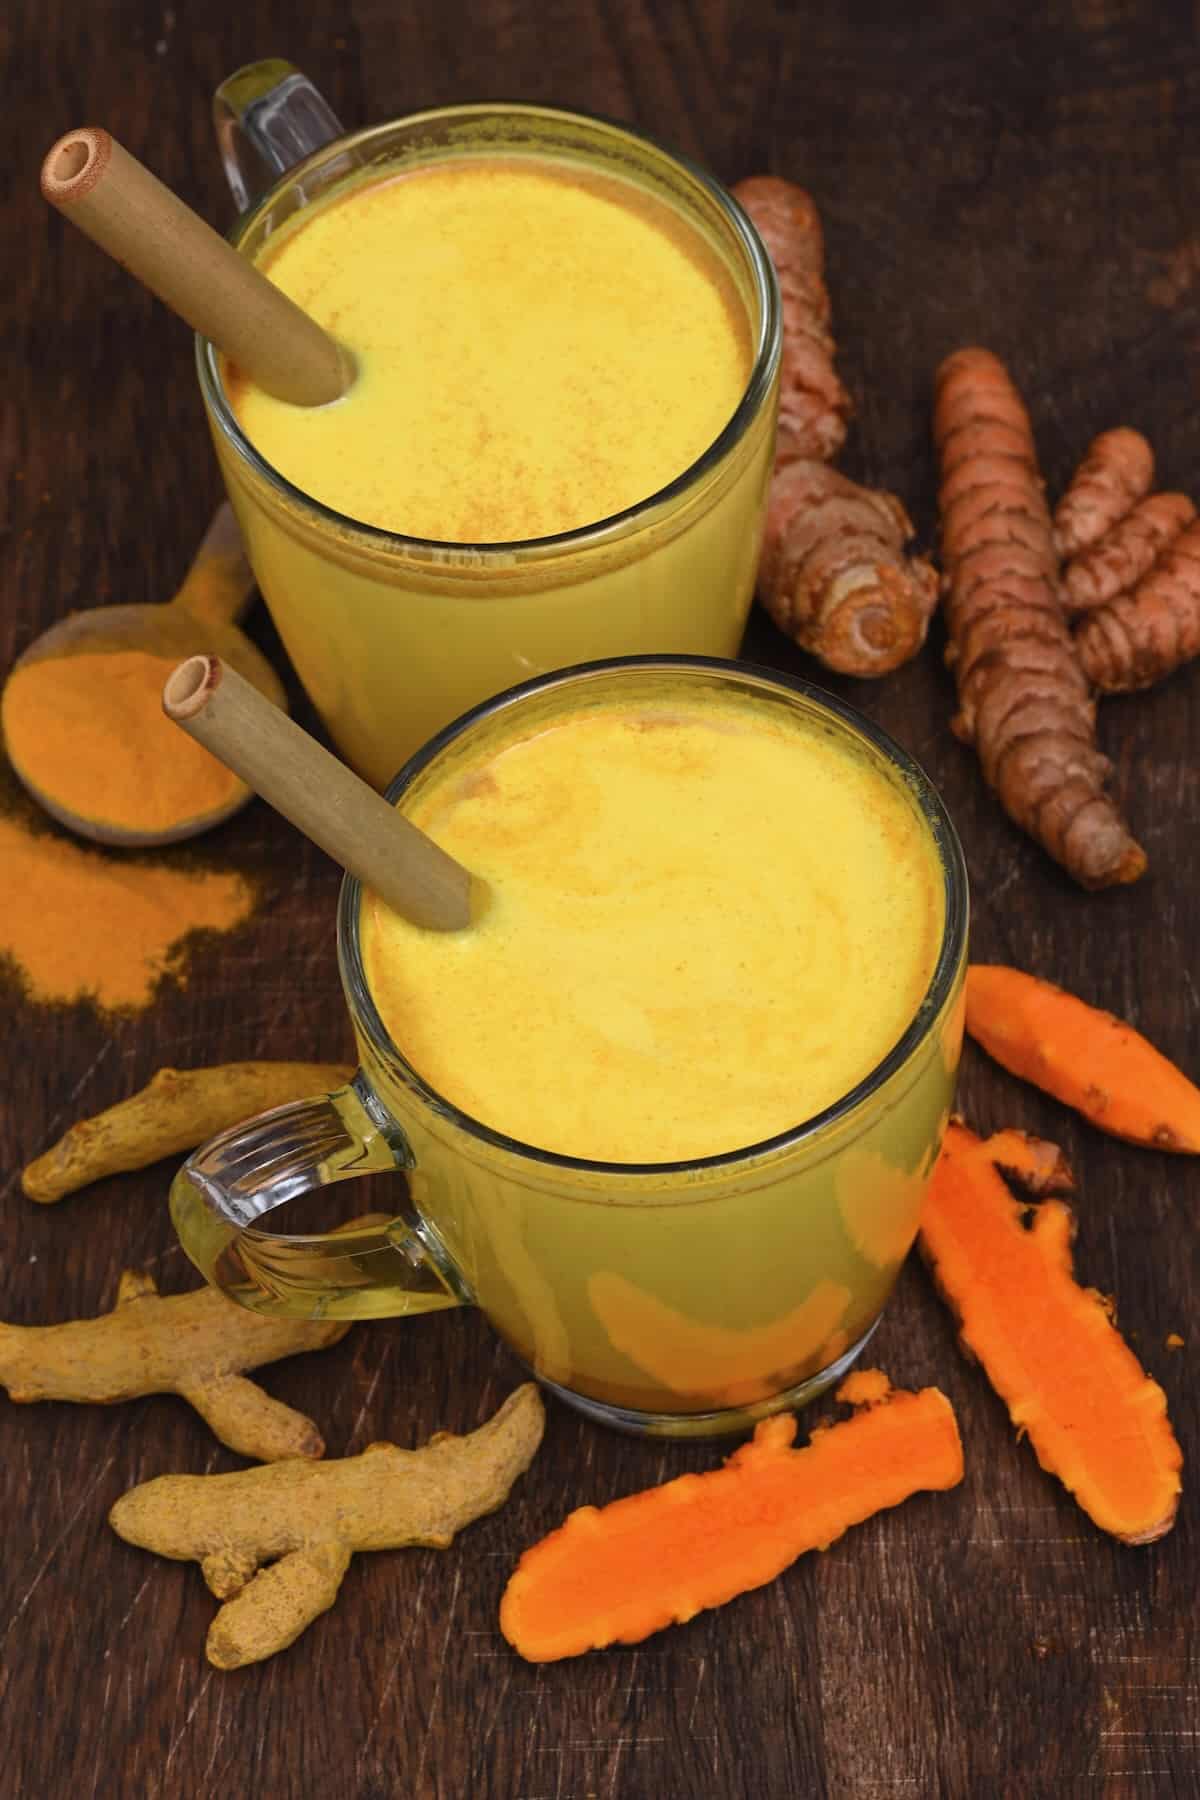 A Guide To Turmeric, What Is Turmeric?